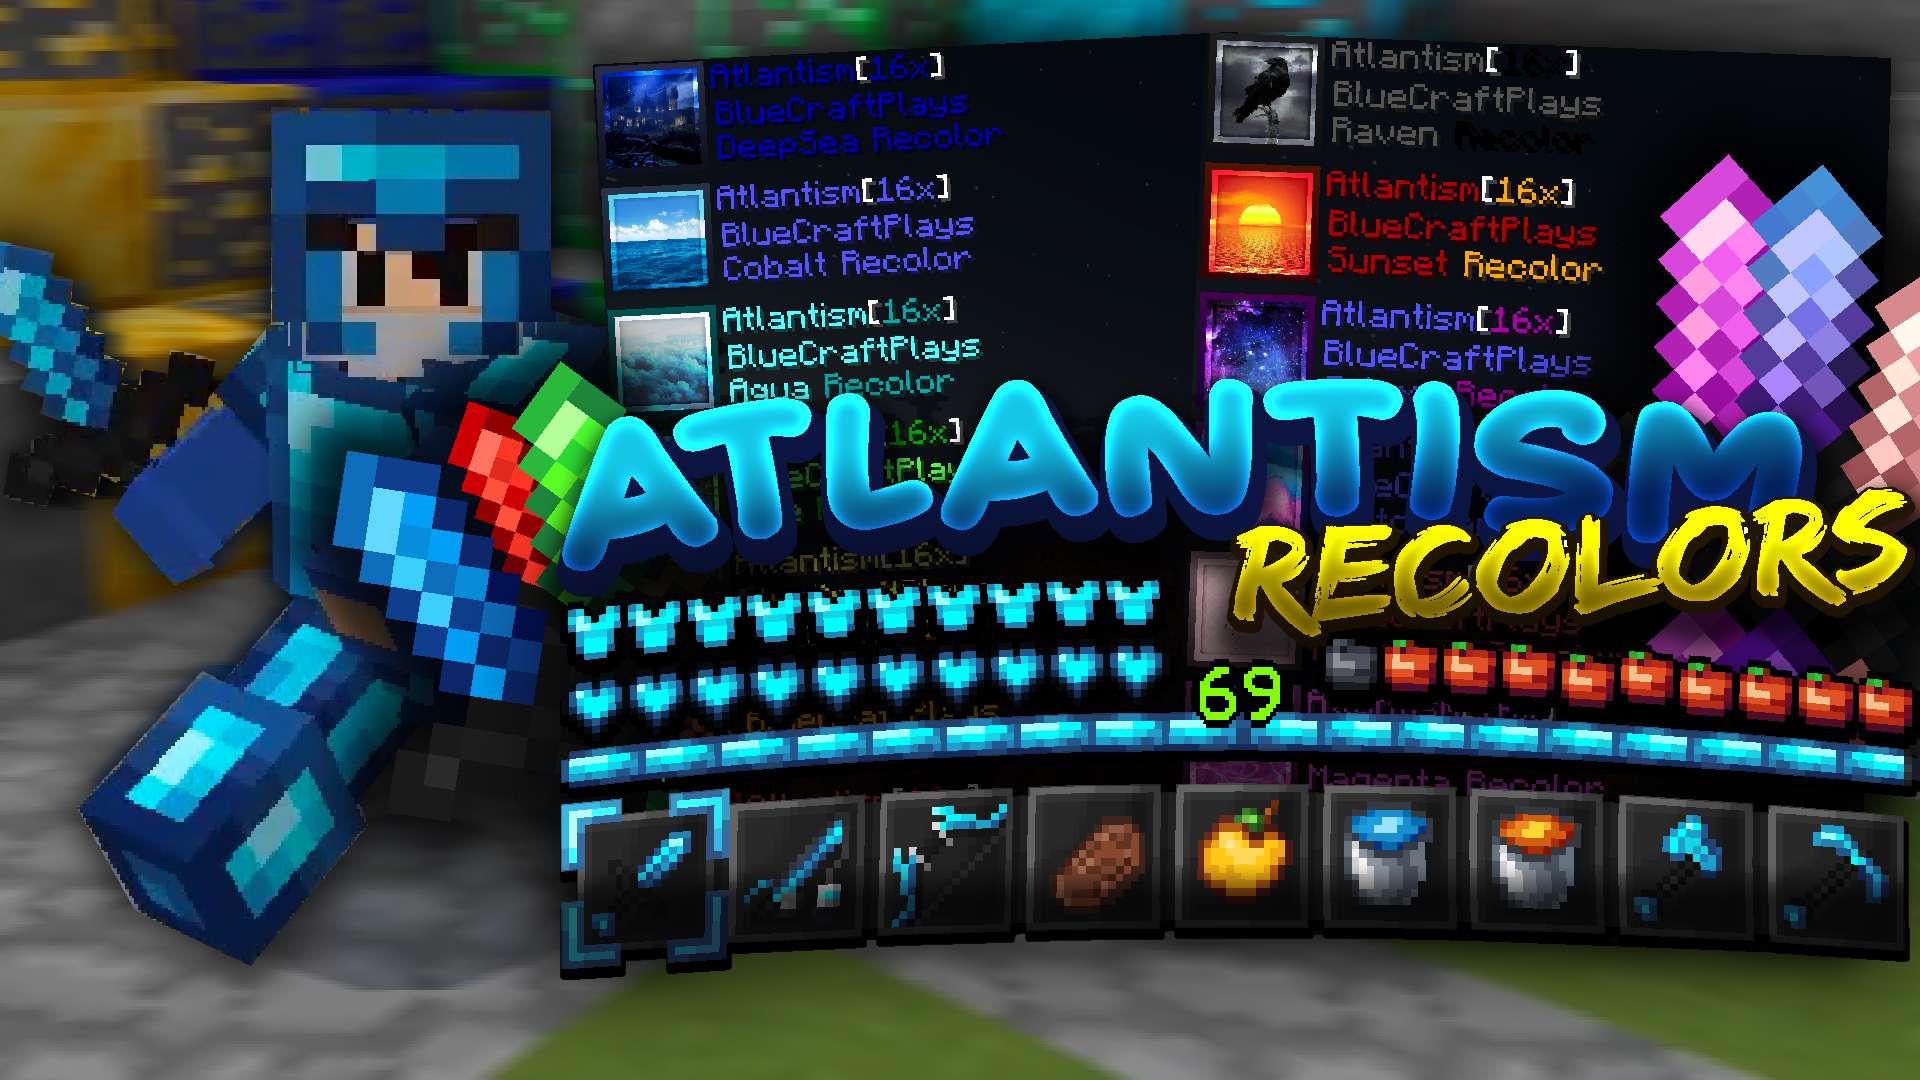 Gallery Banner for Atlantism Rose-Gold Recolor on PvPRP